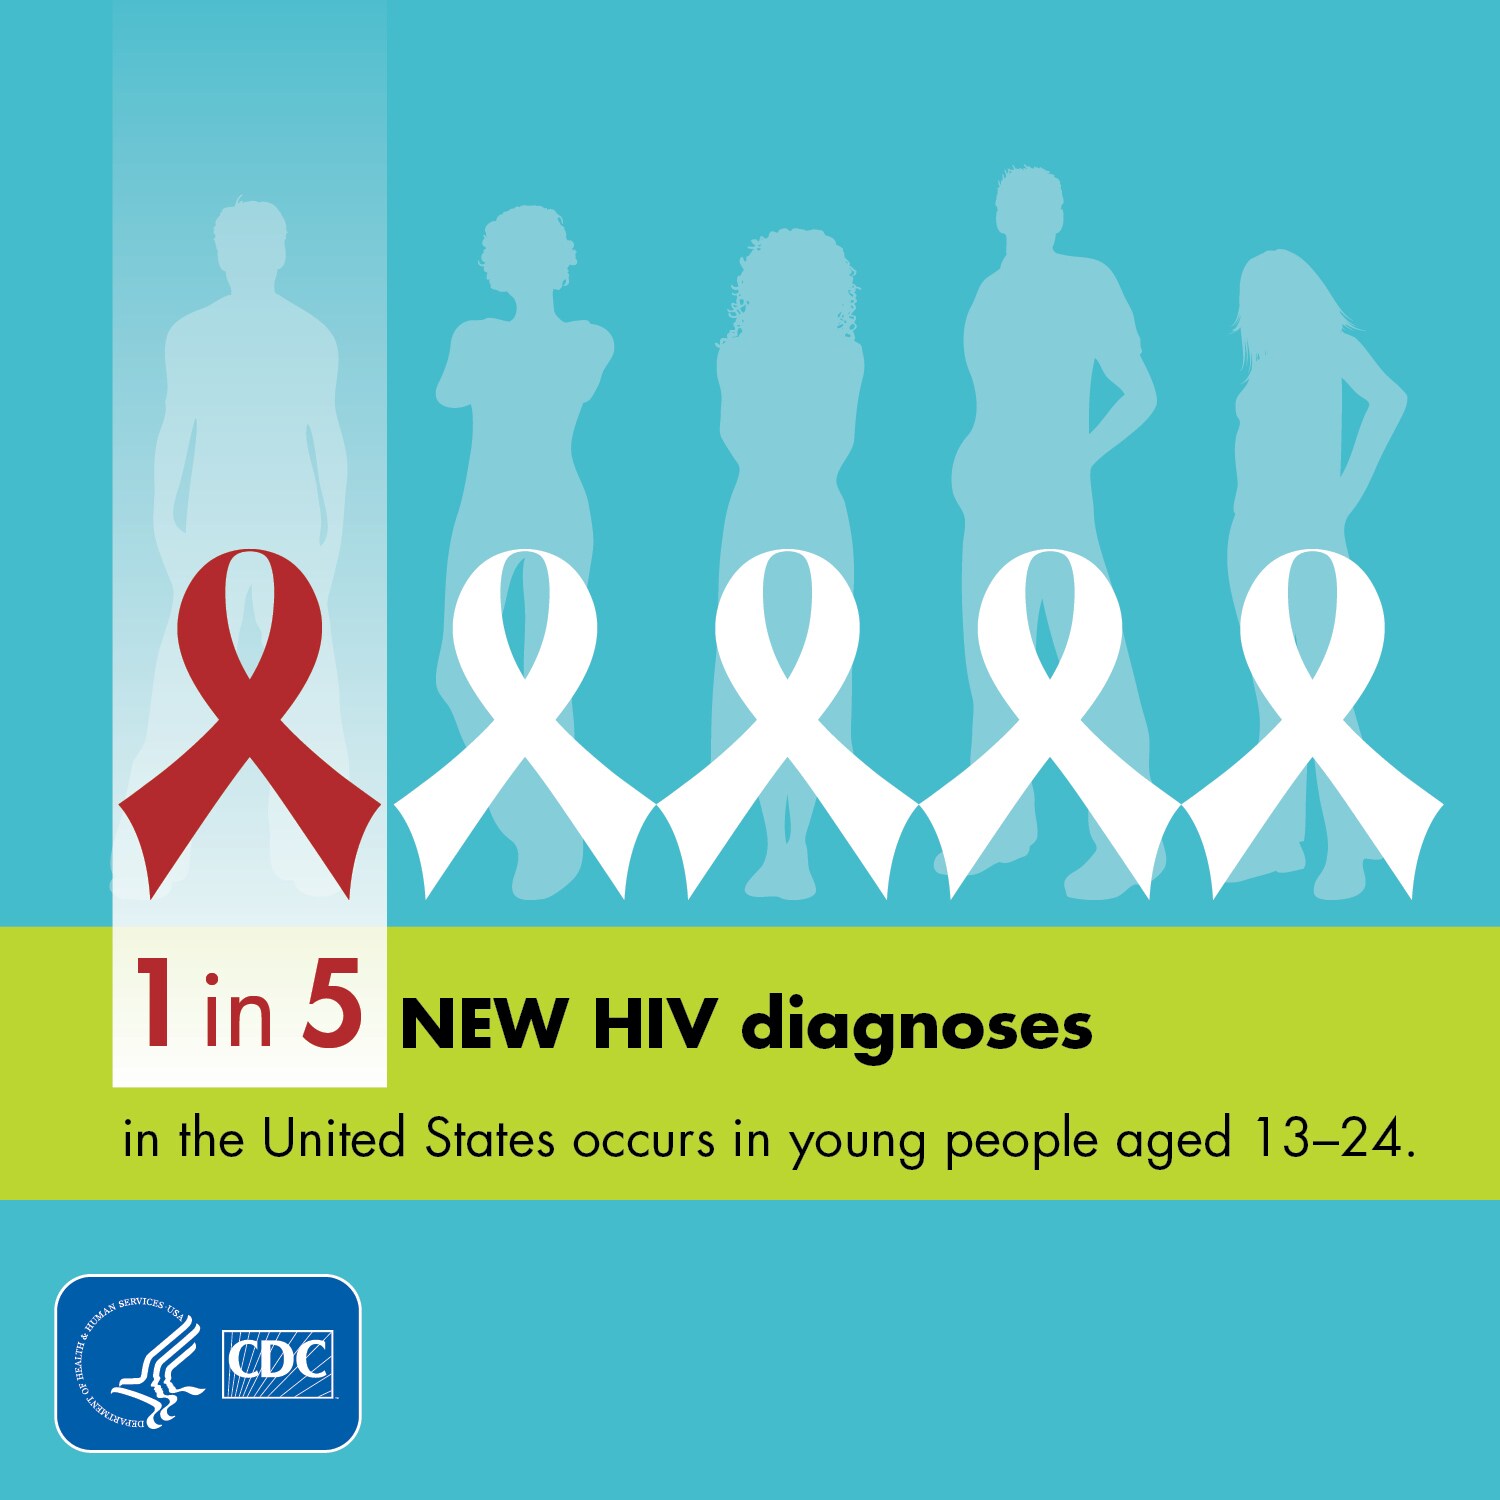 Infographic: 1 in 5 new HIV diagnoses occurs in young people ages 13-24